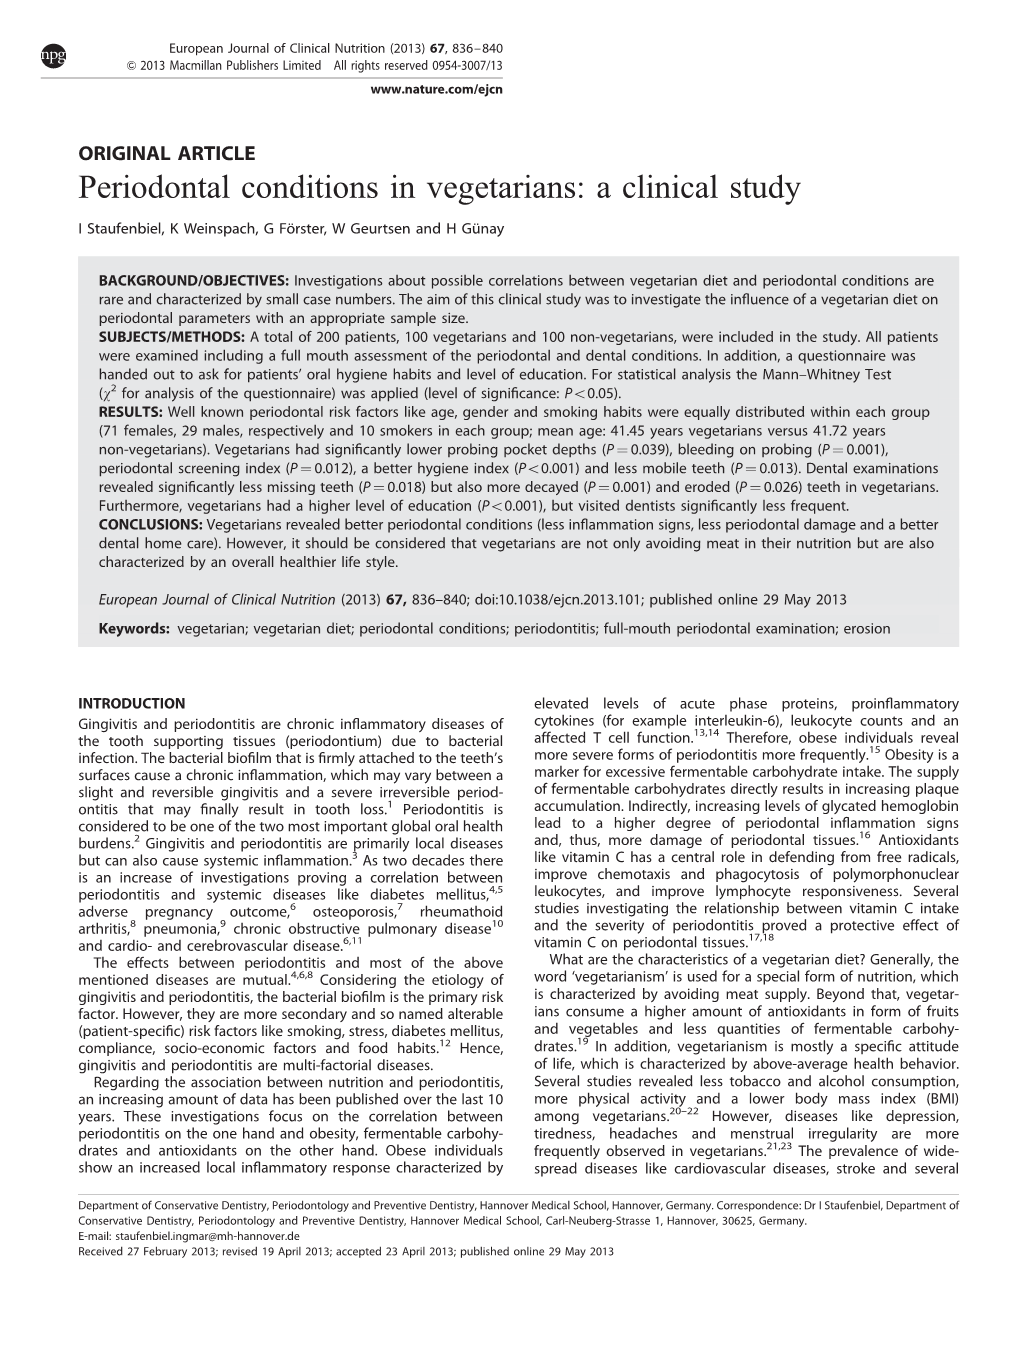 Periodontal Conditions in Vegetarians: a Clinical Study